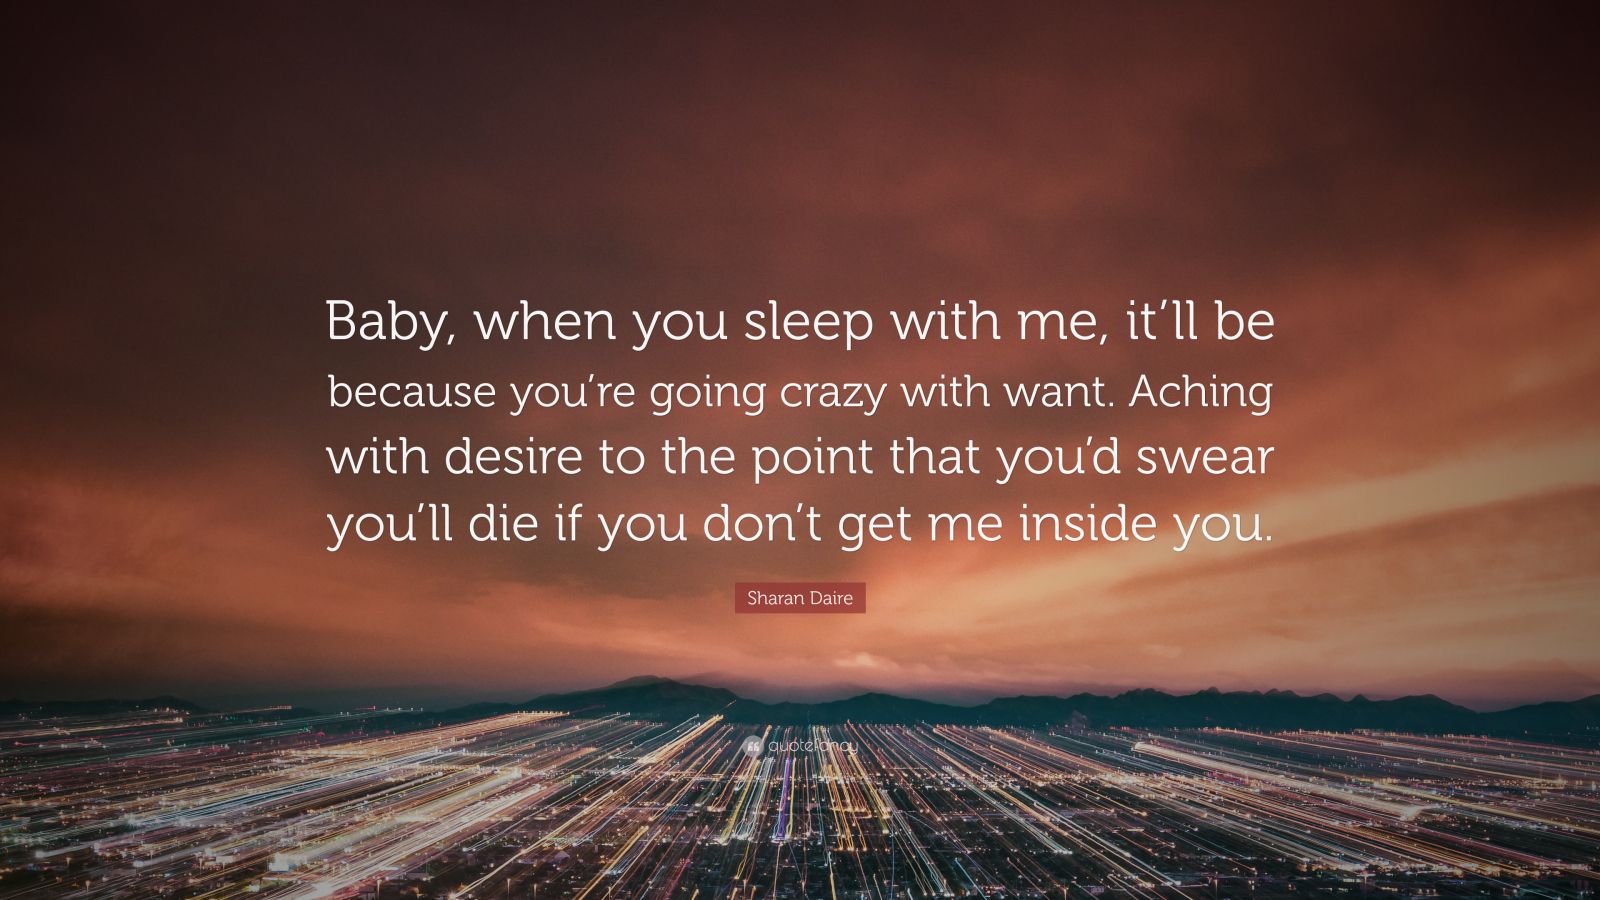 Sharan Daire Quote: “Baby, when you sleep with me, it’ll be because you ...